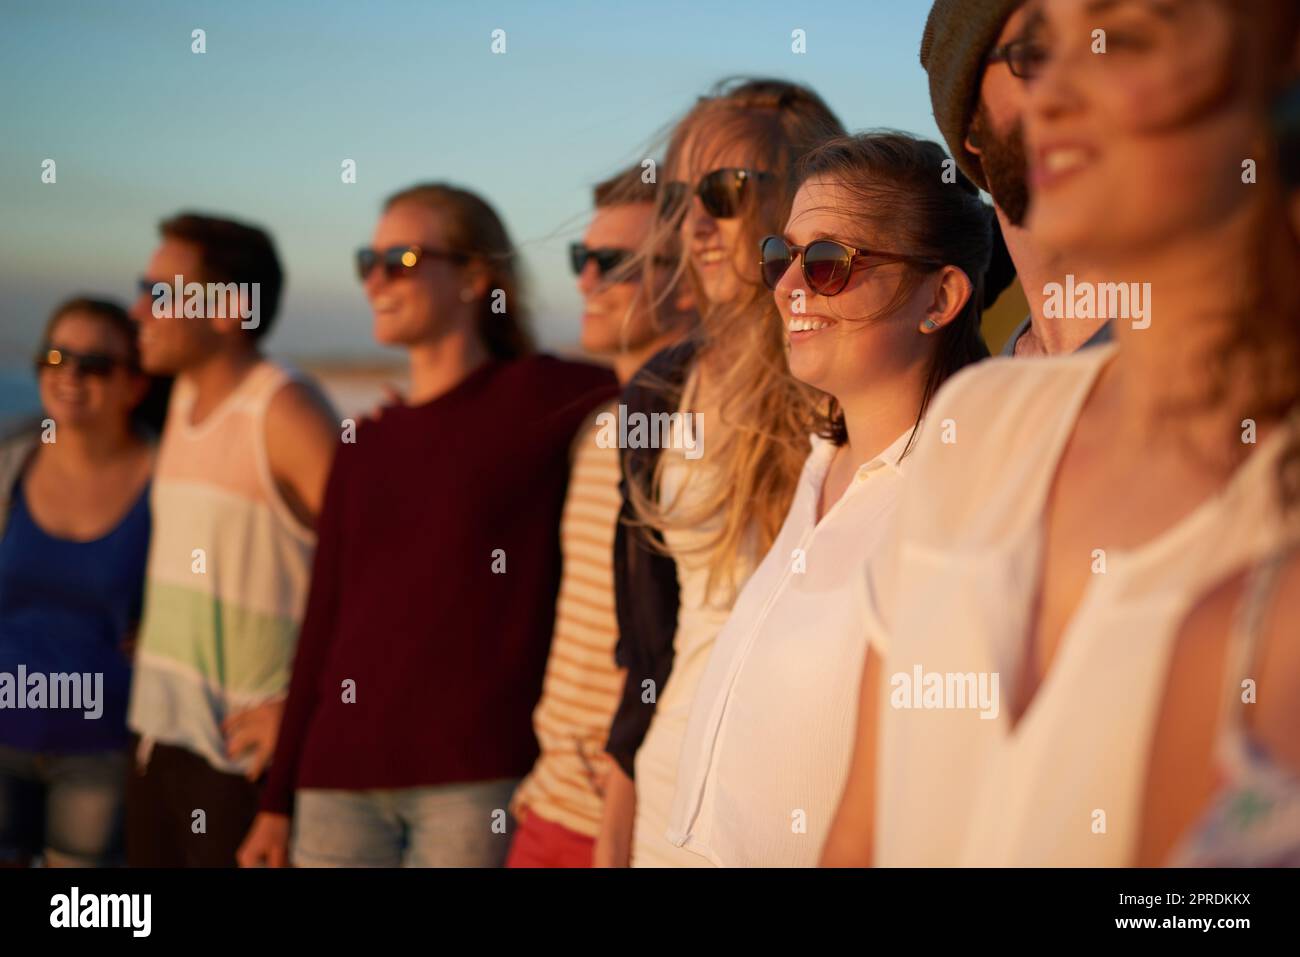 Its a summer to be remembered. a group of young friends standing together on the beach during the day. Stock Photo